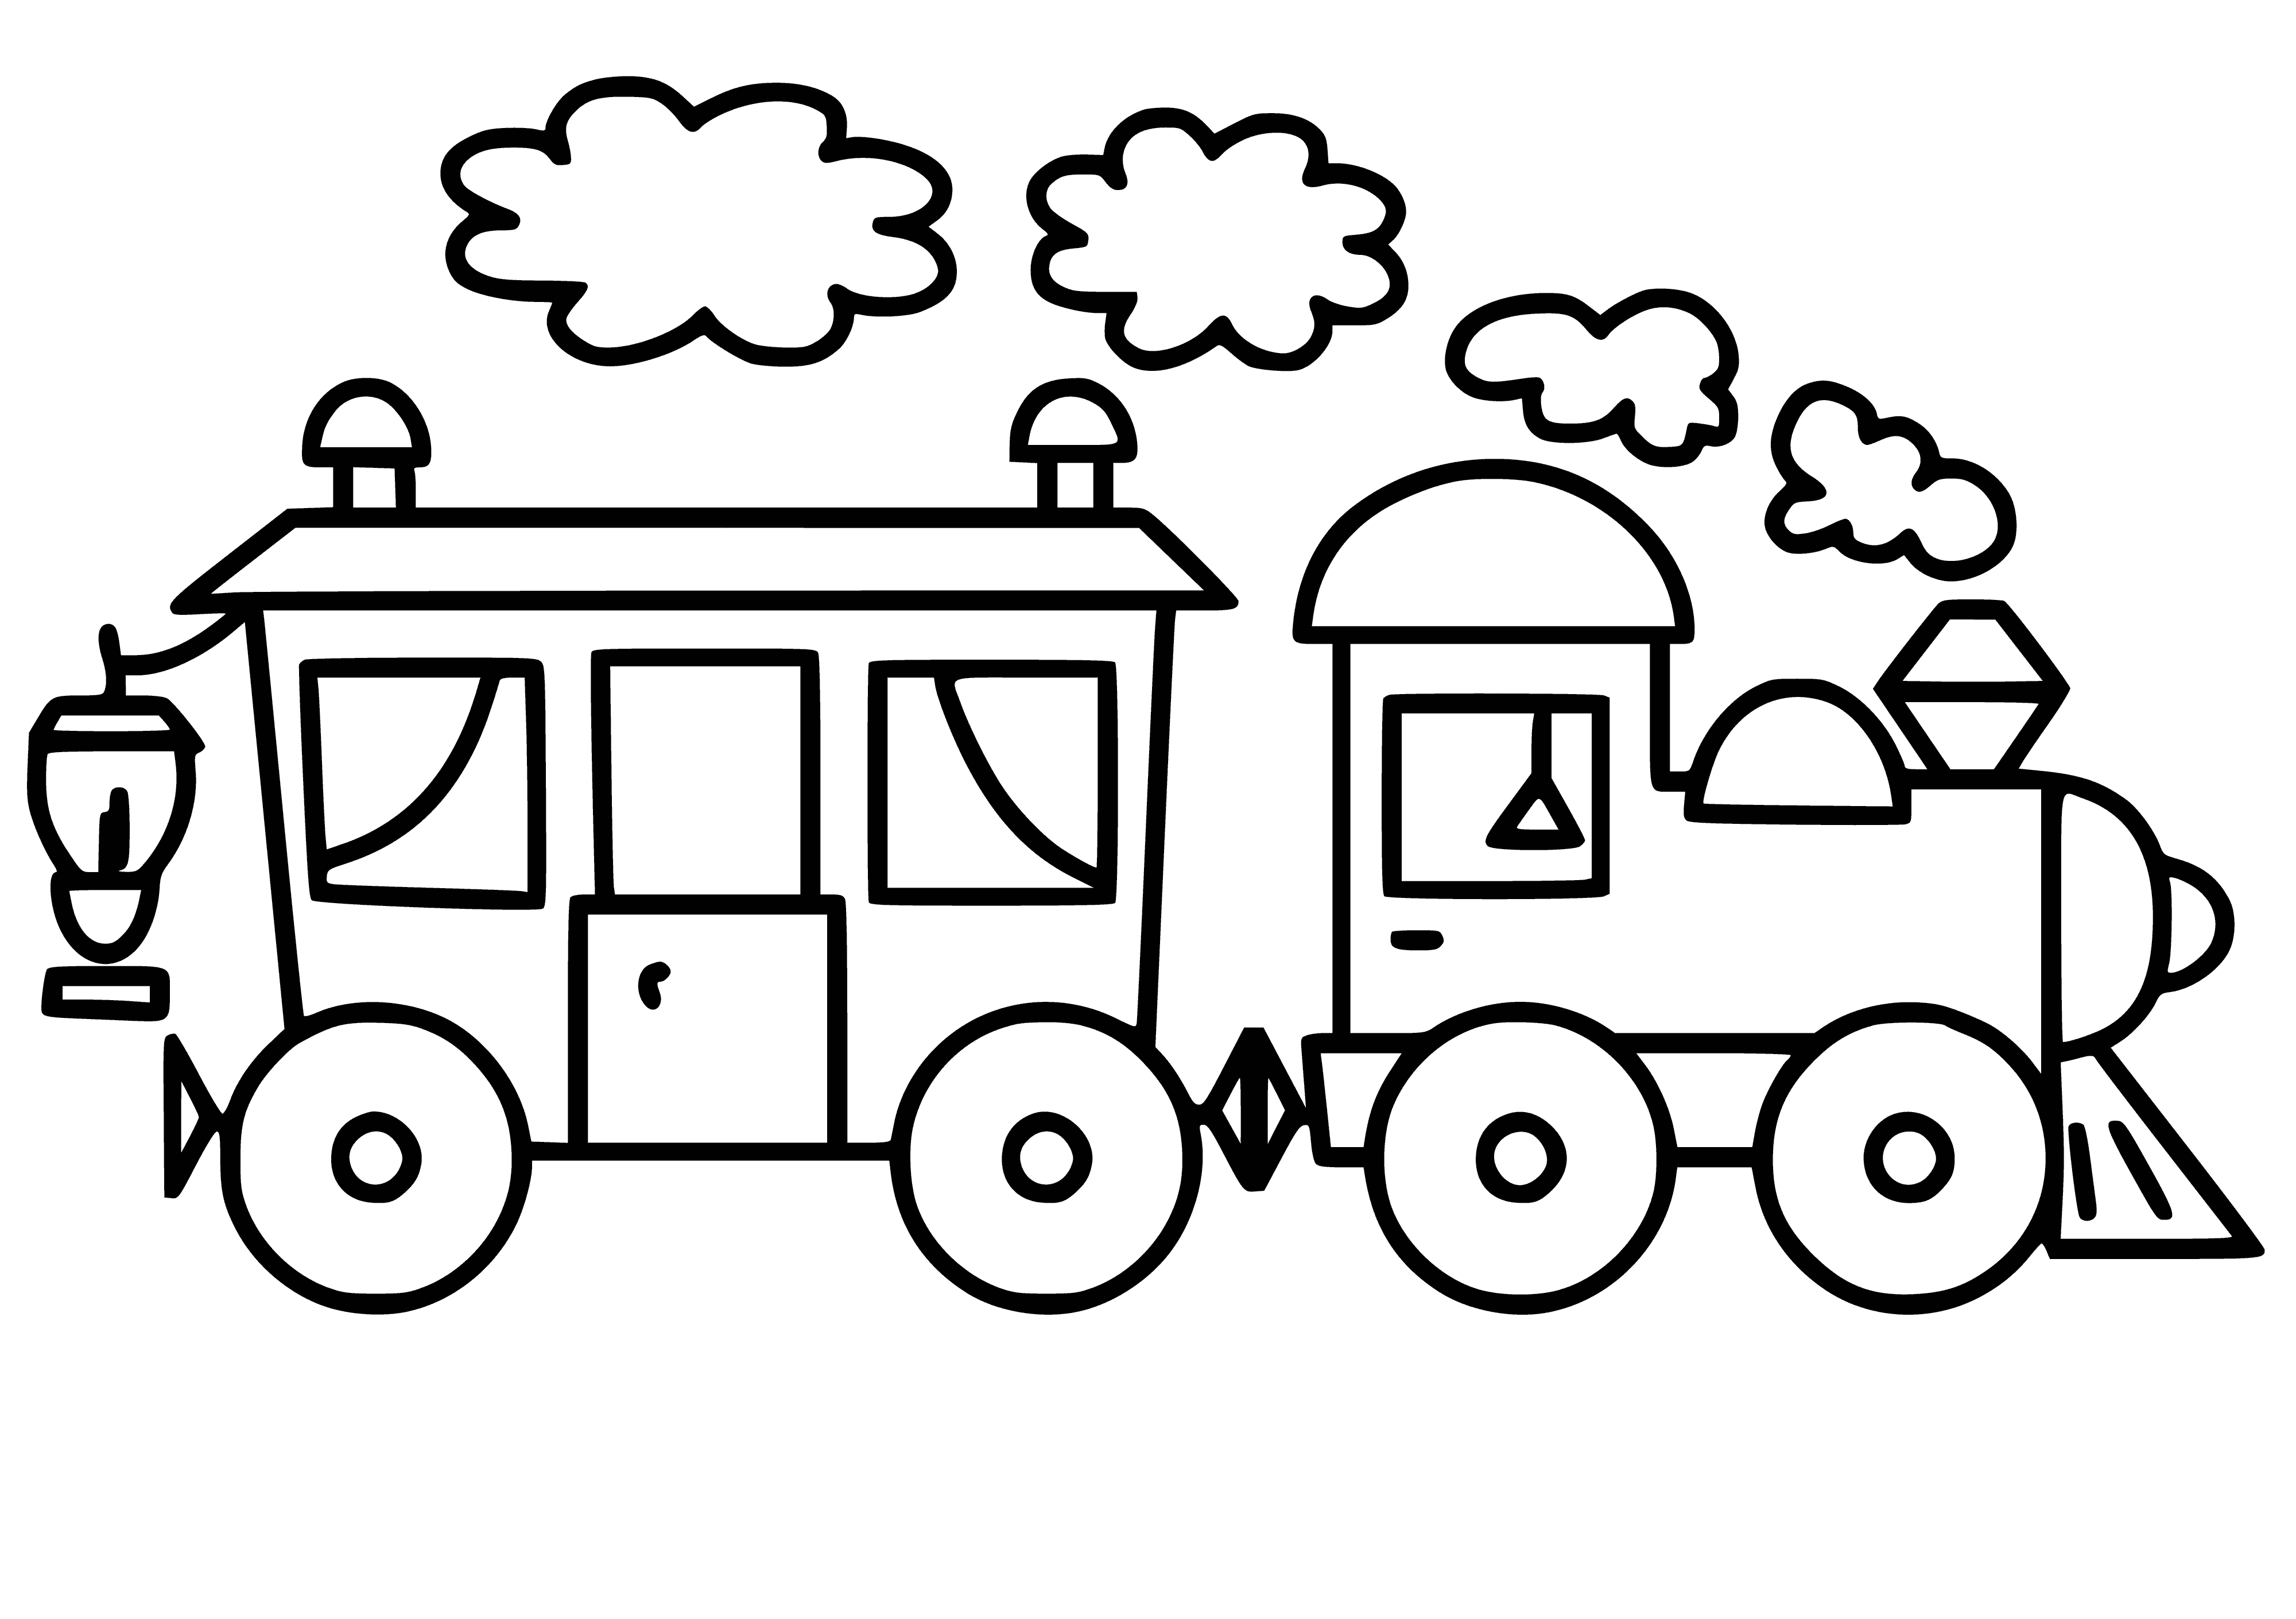 coloring page: A black and white coloring page of a locomotive chugging forward, leaving a trail of smoke in its wake.